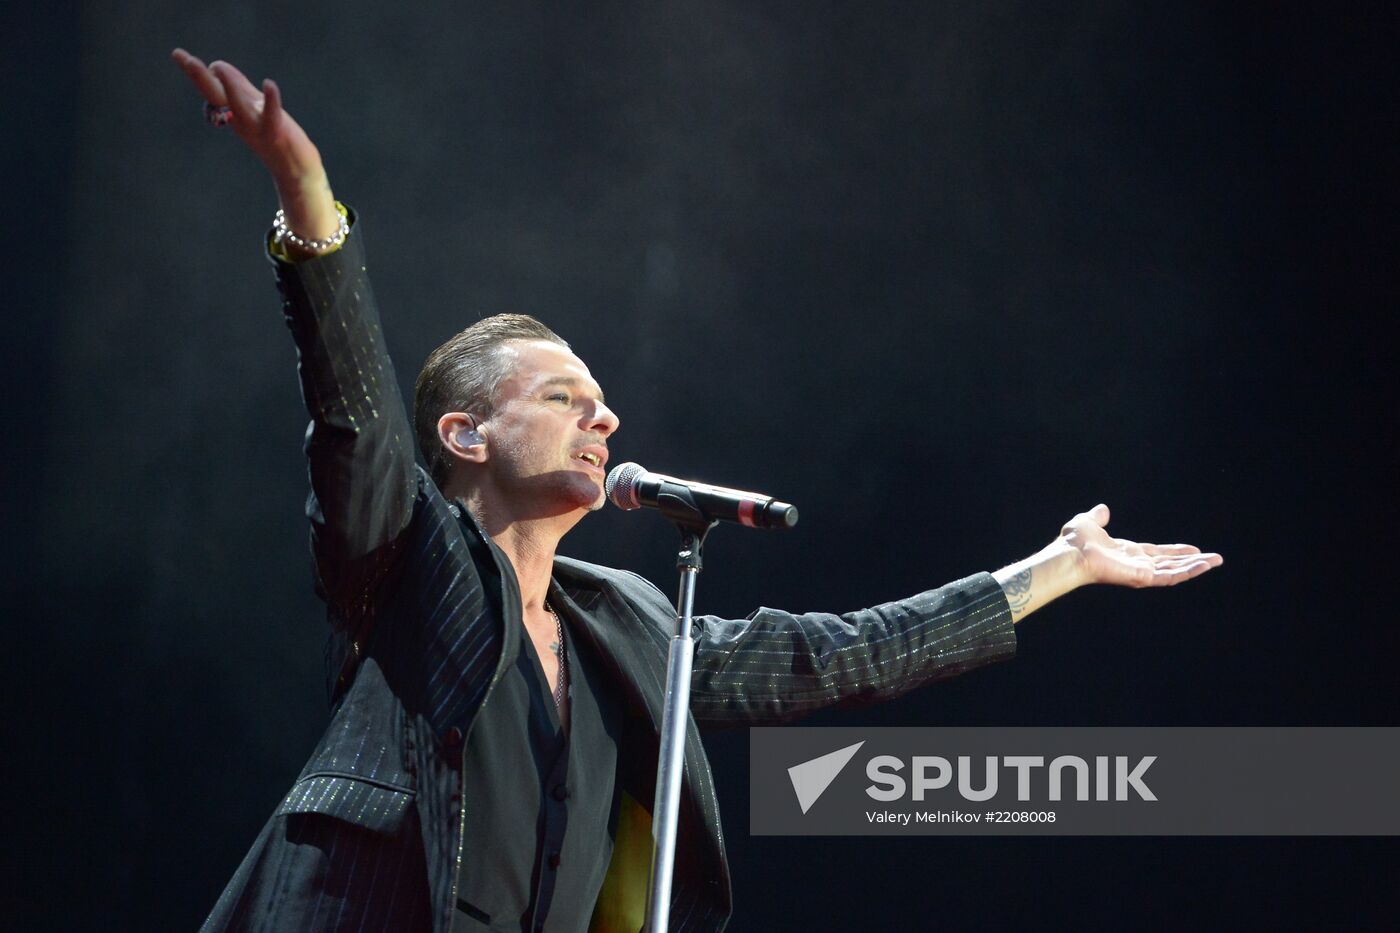 Depeche Mode give a concert in Moscow